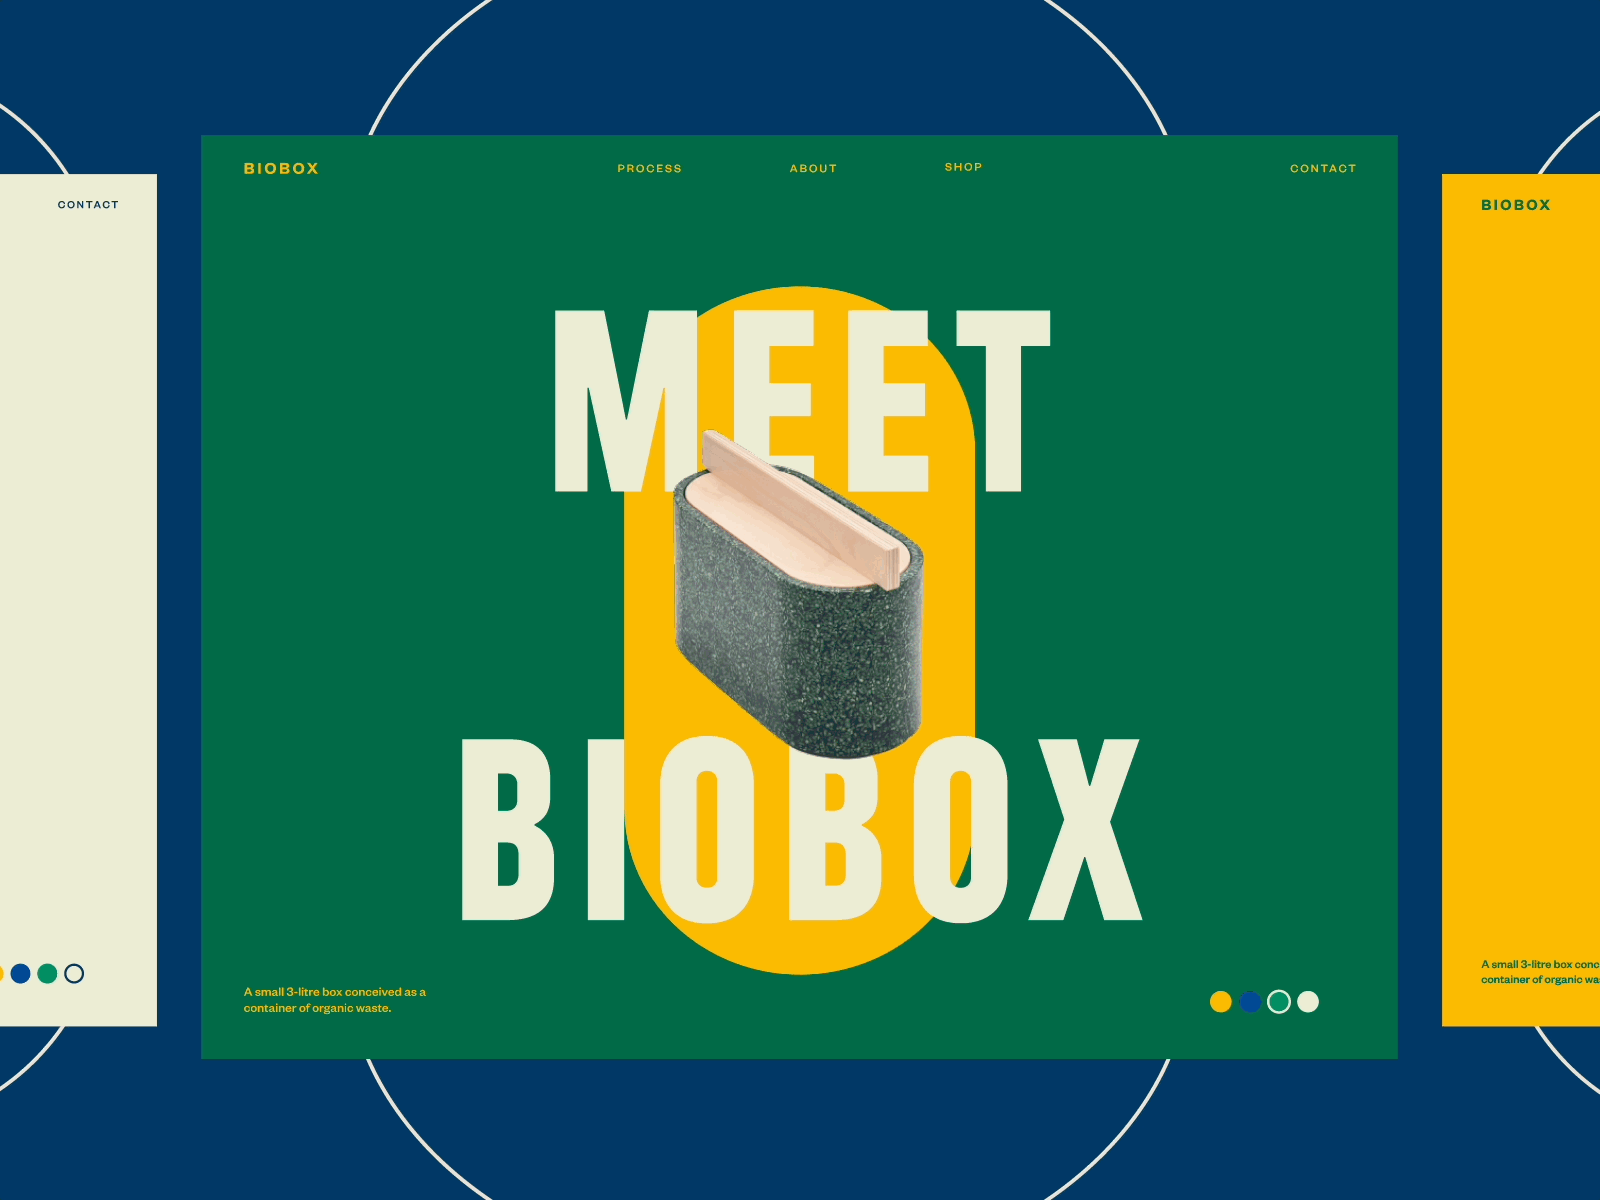 BIOBOX | A box that contains useful waste ecommerce graphic design homescreen illustration landing design landing page landingpage product design product focus shop sustainable webiste website design